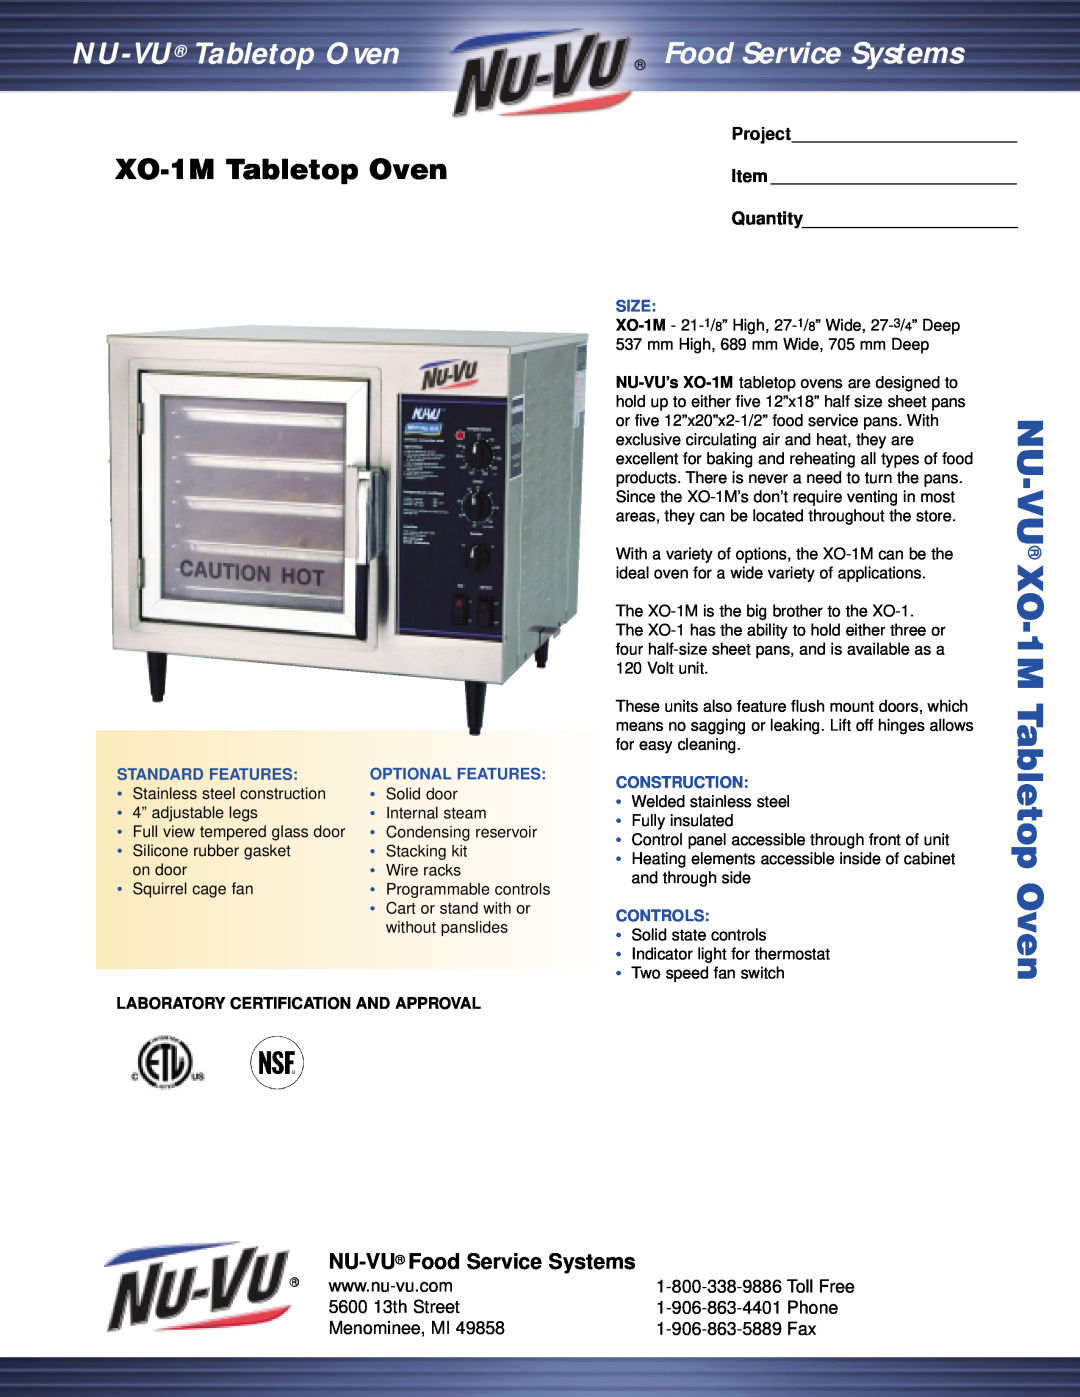 Middleby Cooking Systems Group manual XO-1MTabletop Oven, NU-VU Food Service Systems, 5600 13th Street, Phone, Size 